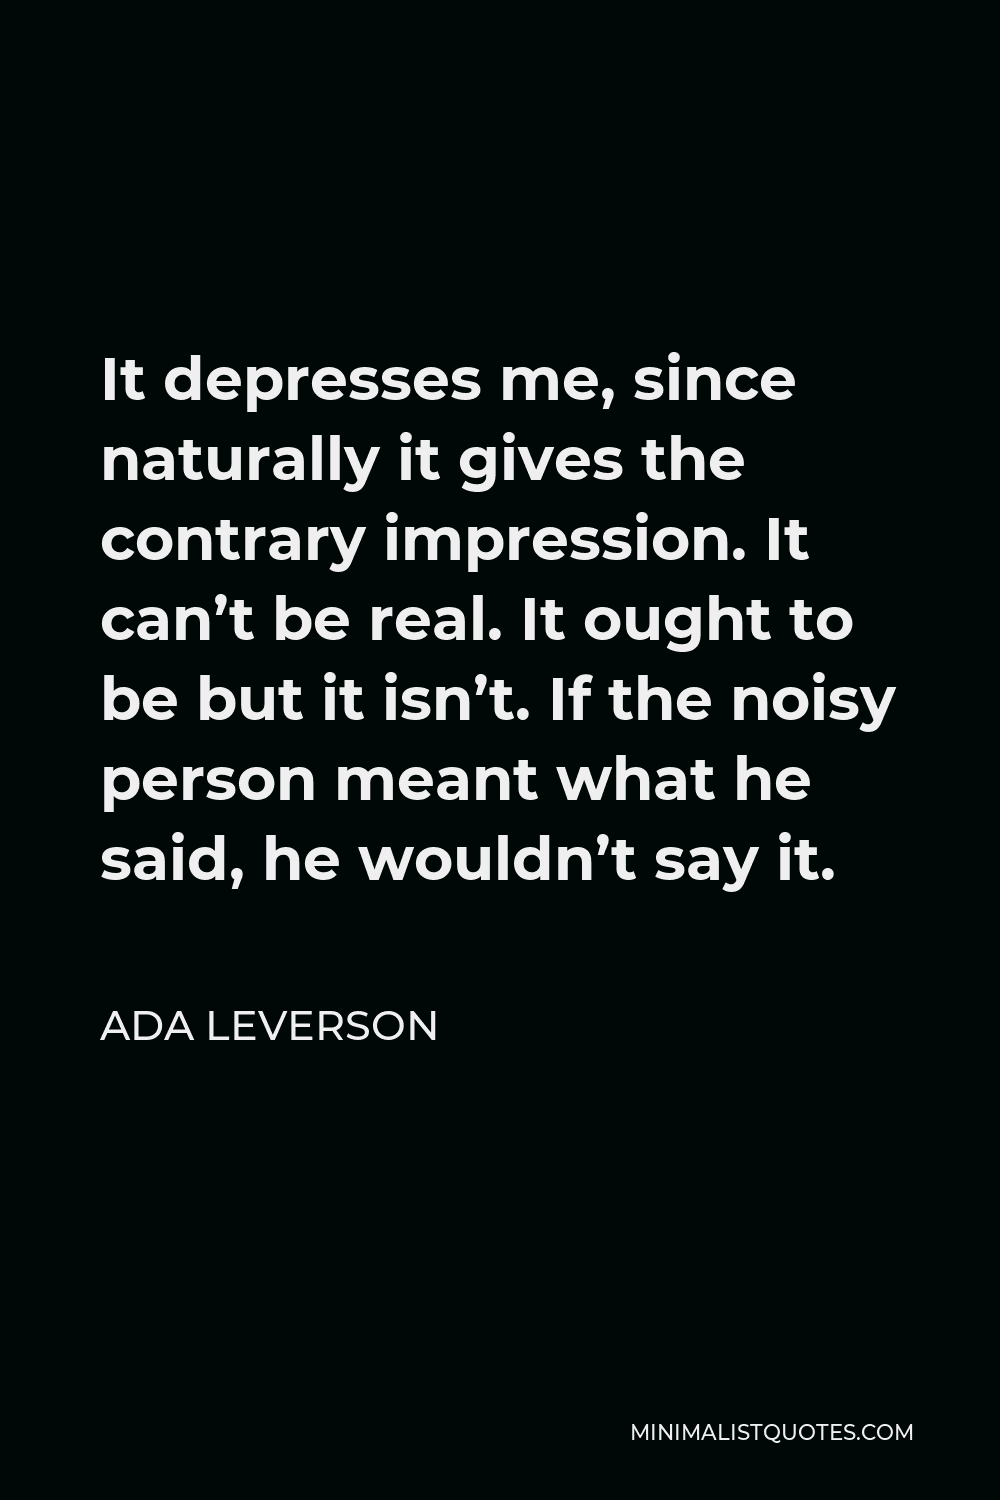 Ada Leverson Quote - It depresses me, since naturally it gives the contrary impression. It can’t be real. It ought to be but it isn’t. If the noisy person meant what he said, he wouldn’t say it.